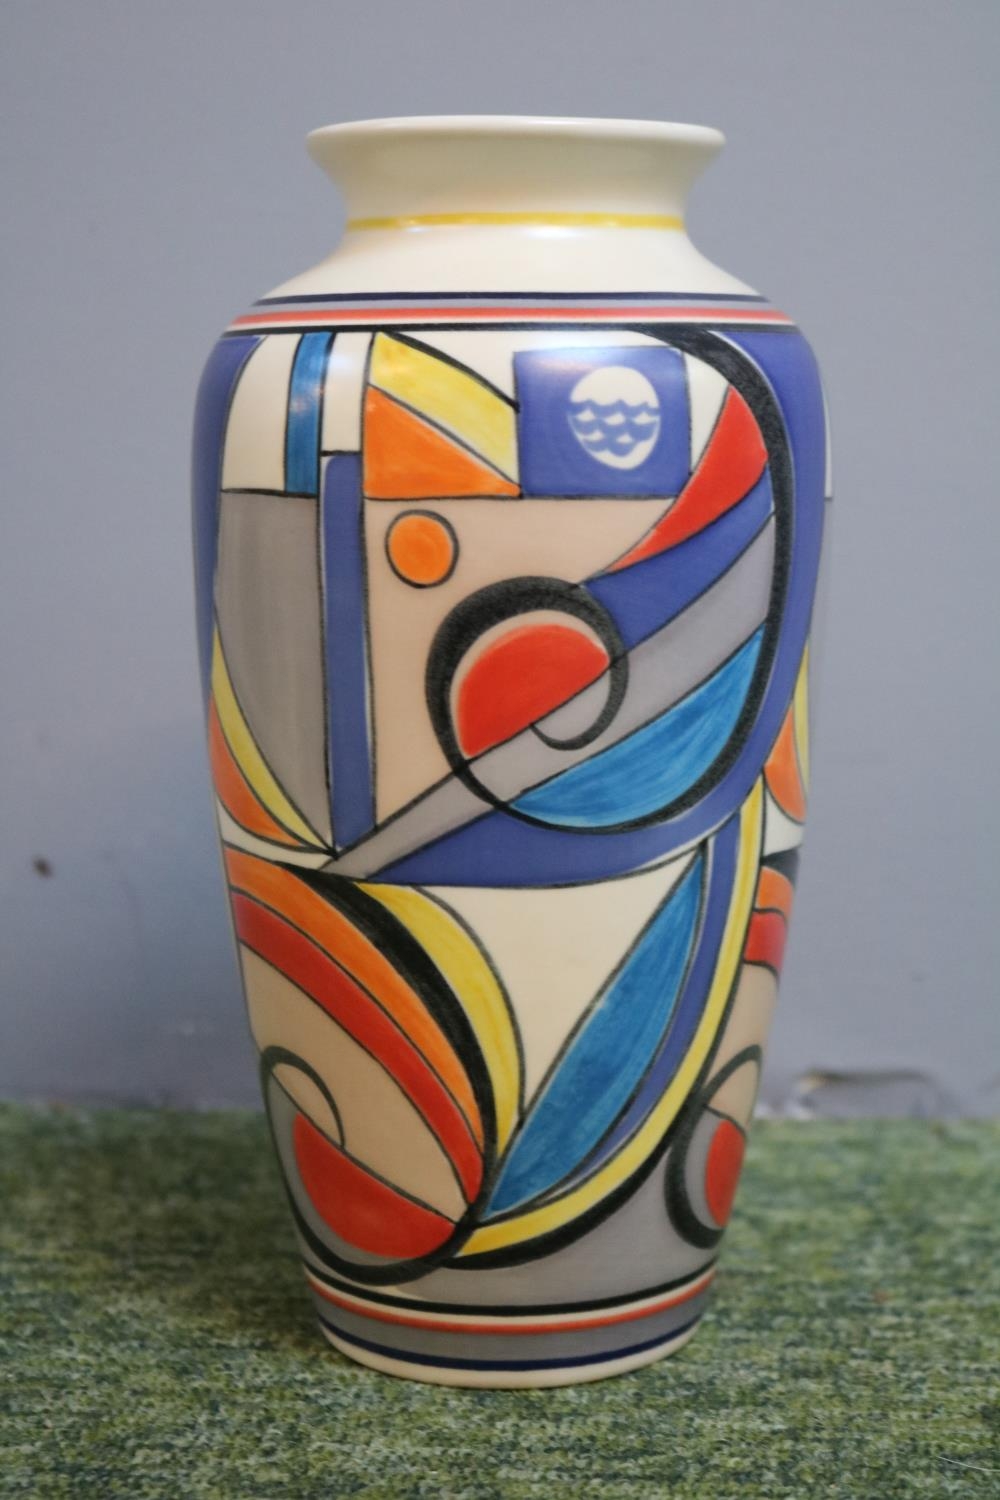 Poole Pottery Geometric Art Deco design vase signed by Karen Brown dated 1999. 21cm in Height - Image 3 of 4